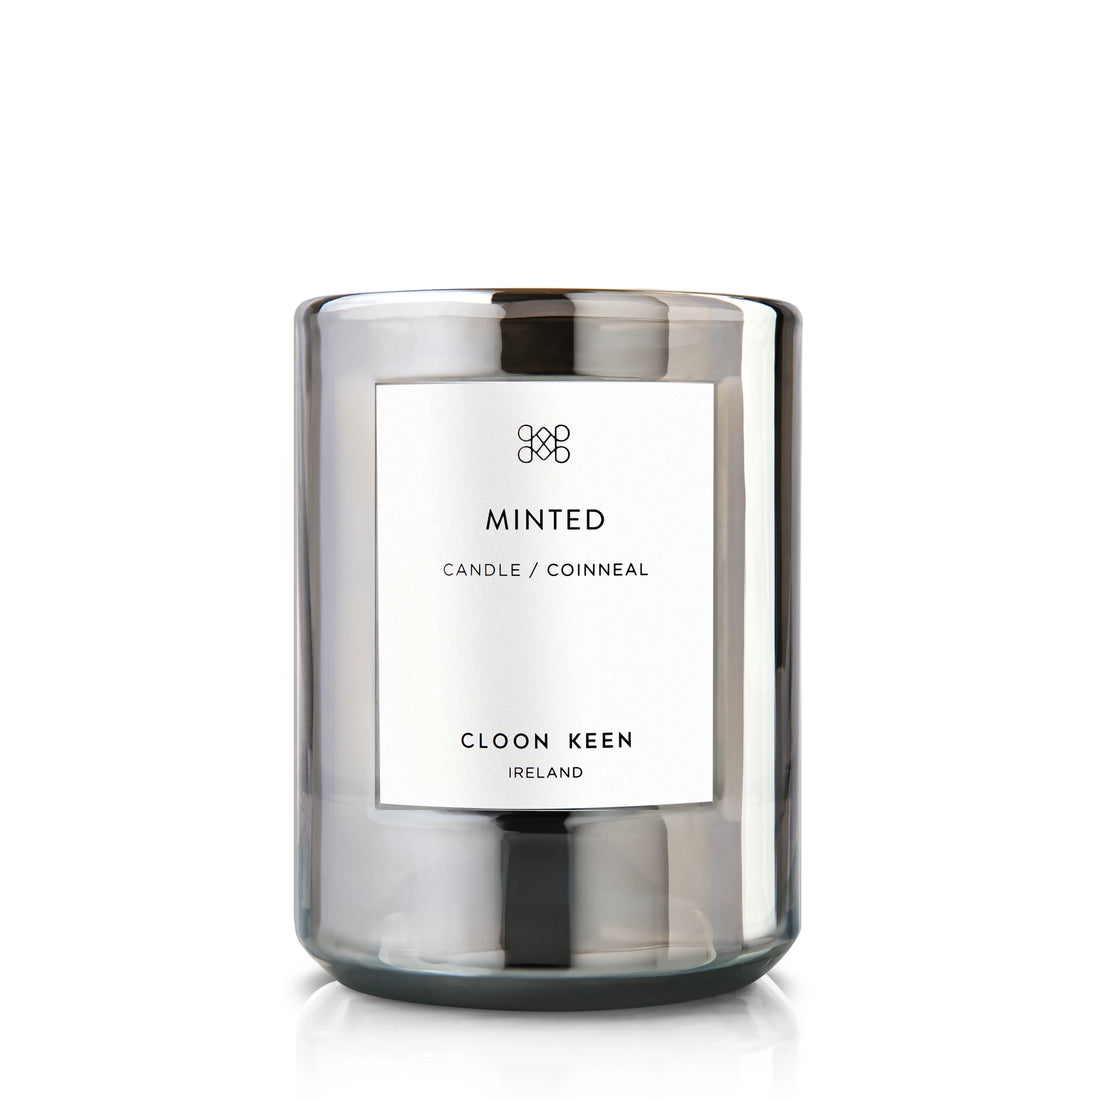 Discover the freshness of Cloon Keen Minted candle. Garden fresh mint, with ripened citrus fruit, sits on aromatic armoise to create a refreshing and modern impression.